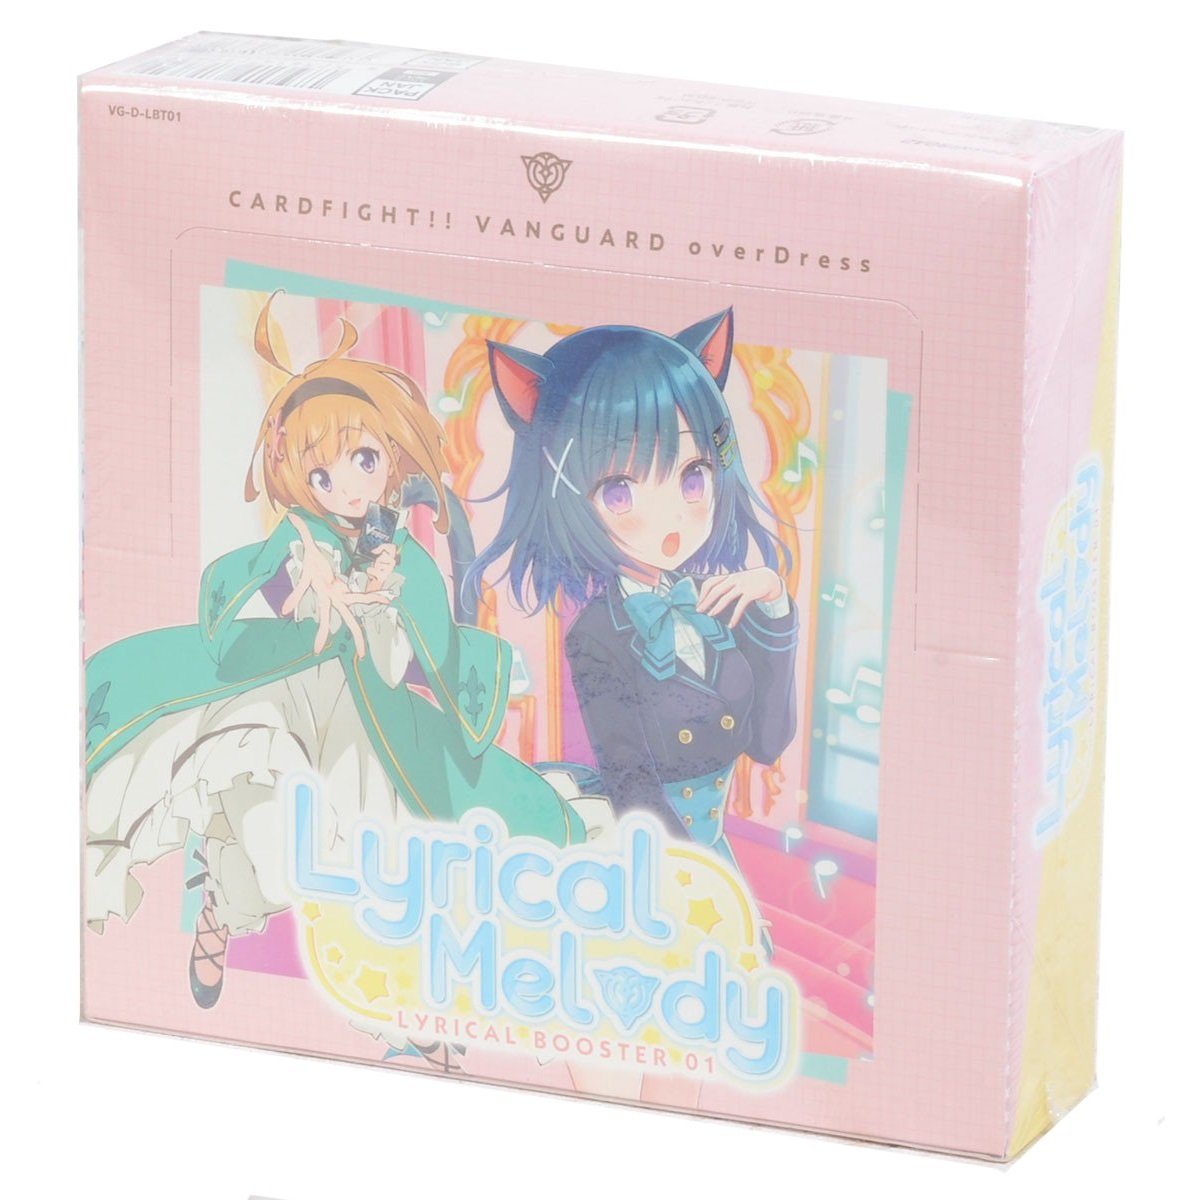 Cardfight Vanguard overDress Lyrical Booster 1st &quot;Lyrical Melody&quot; [VG-D-LBT01] (Japanese)-Booster Box (16packs)-Bushiroad-Ace Cards &amp; Collectibles